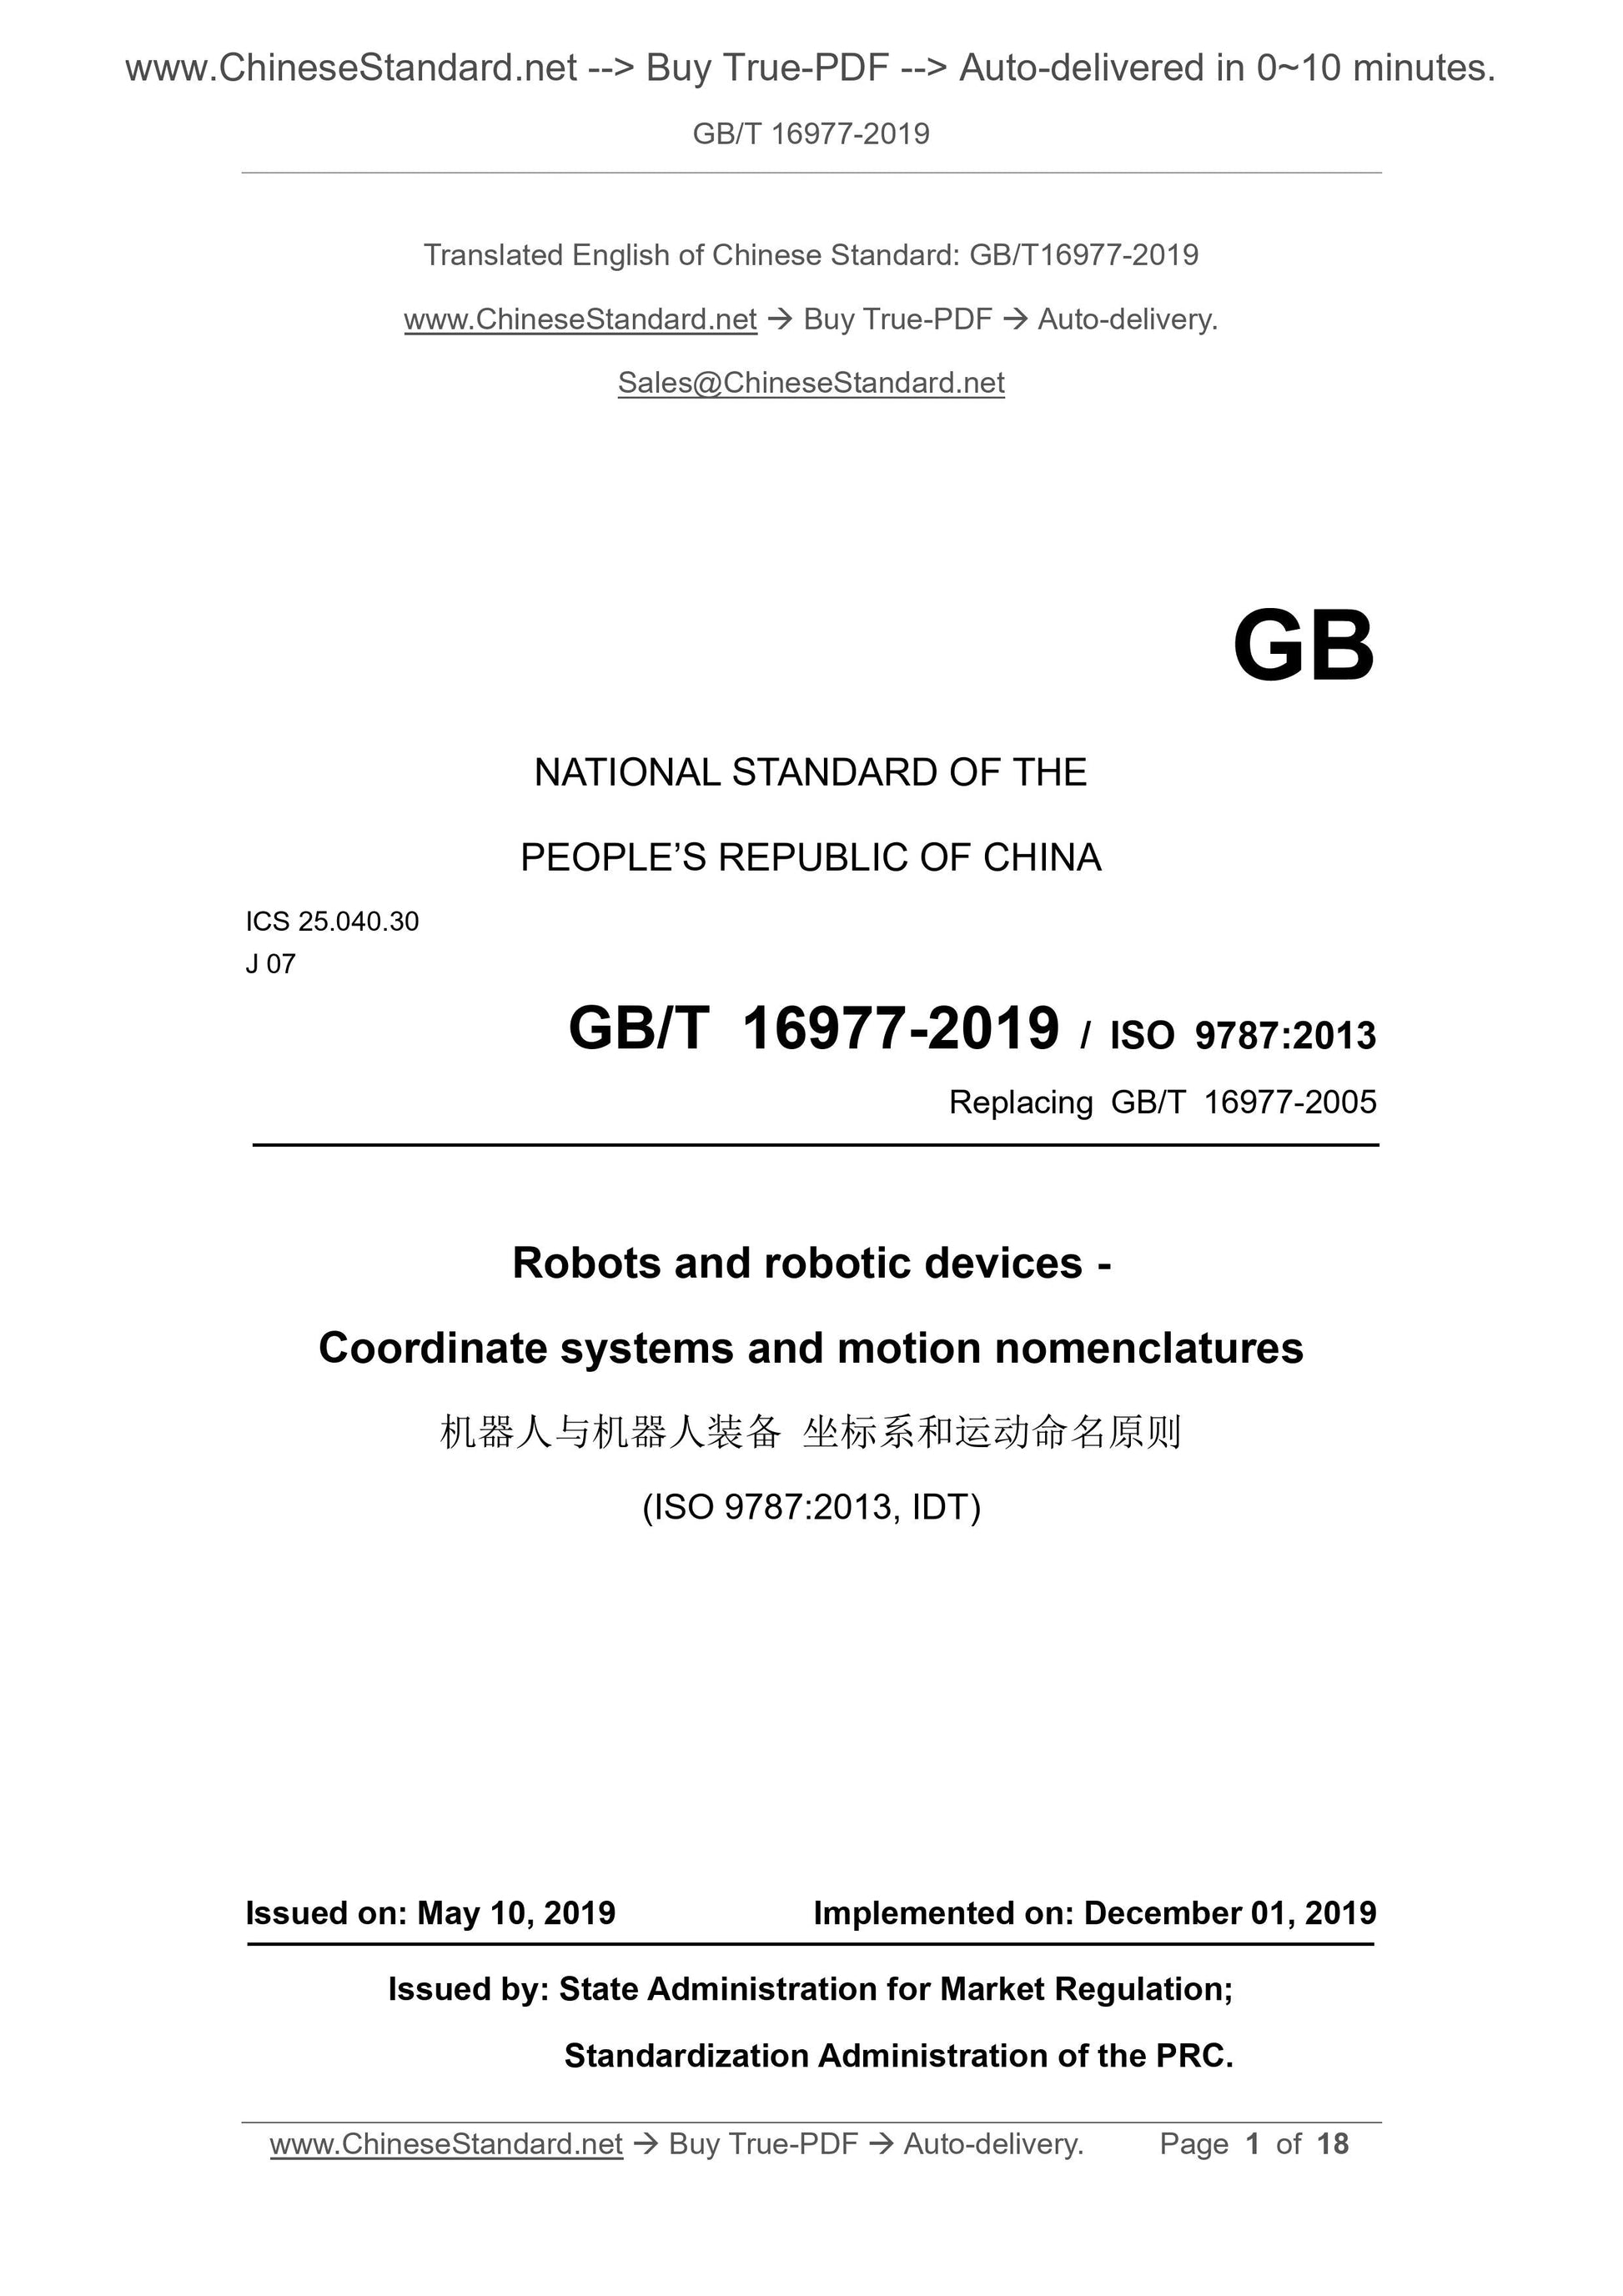 GB/T 16977-2019 Page 1